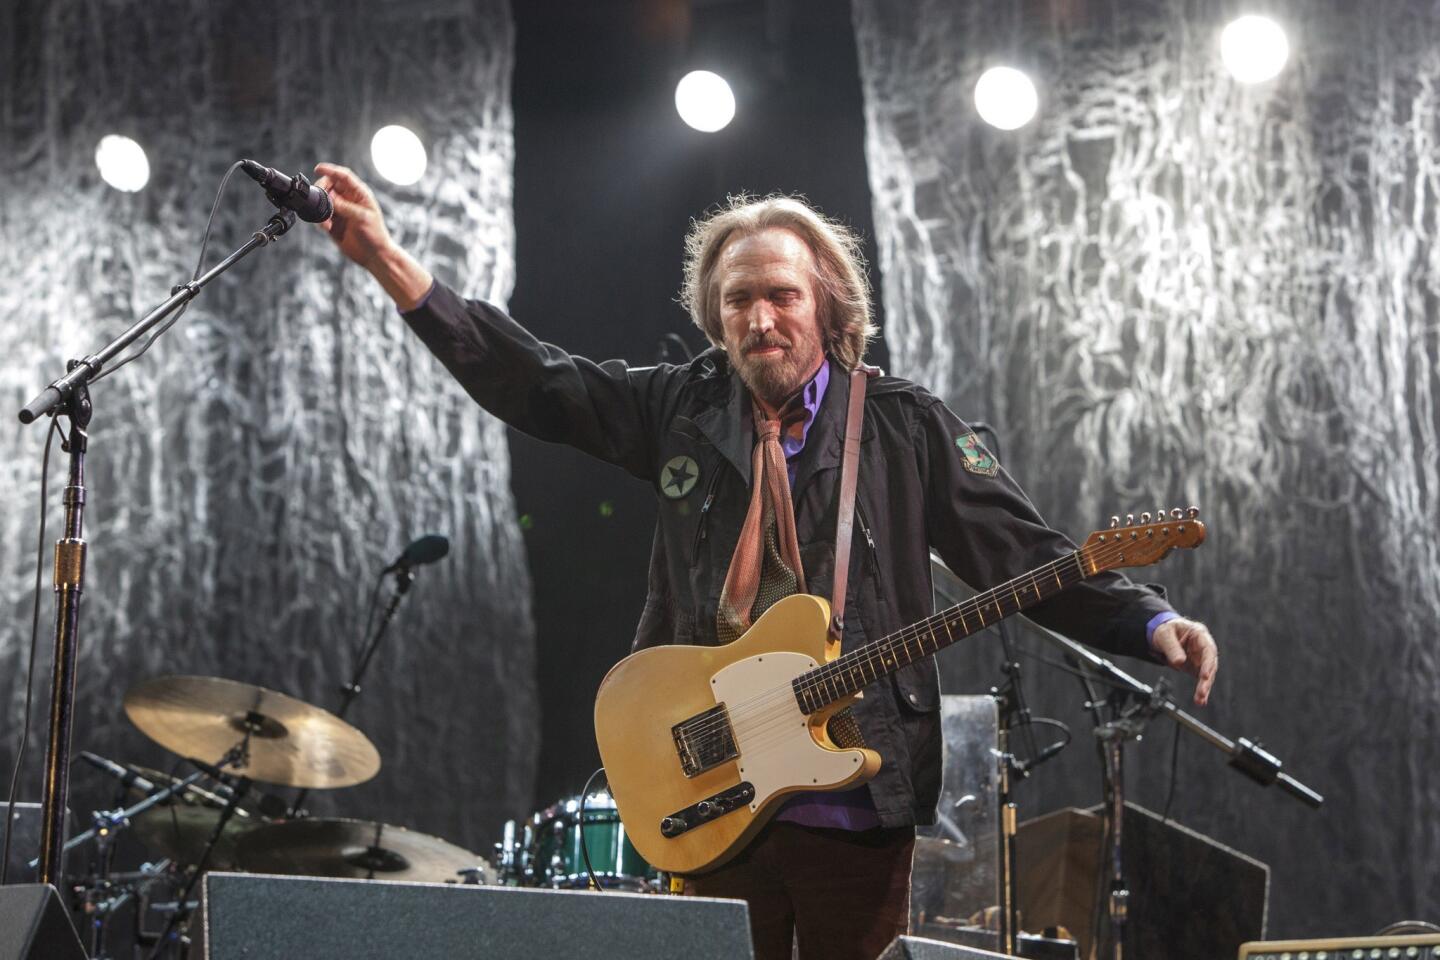 Tom Petty and the Heartbreakers concert cut short by fire marshals